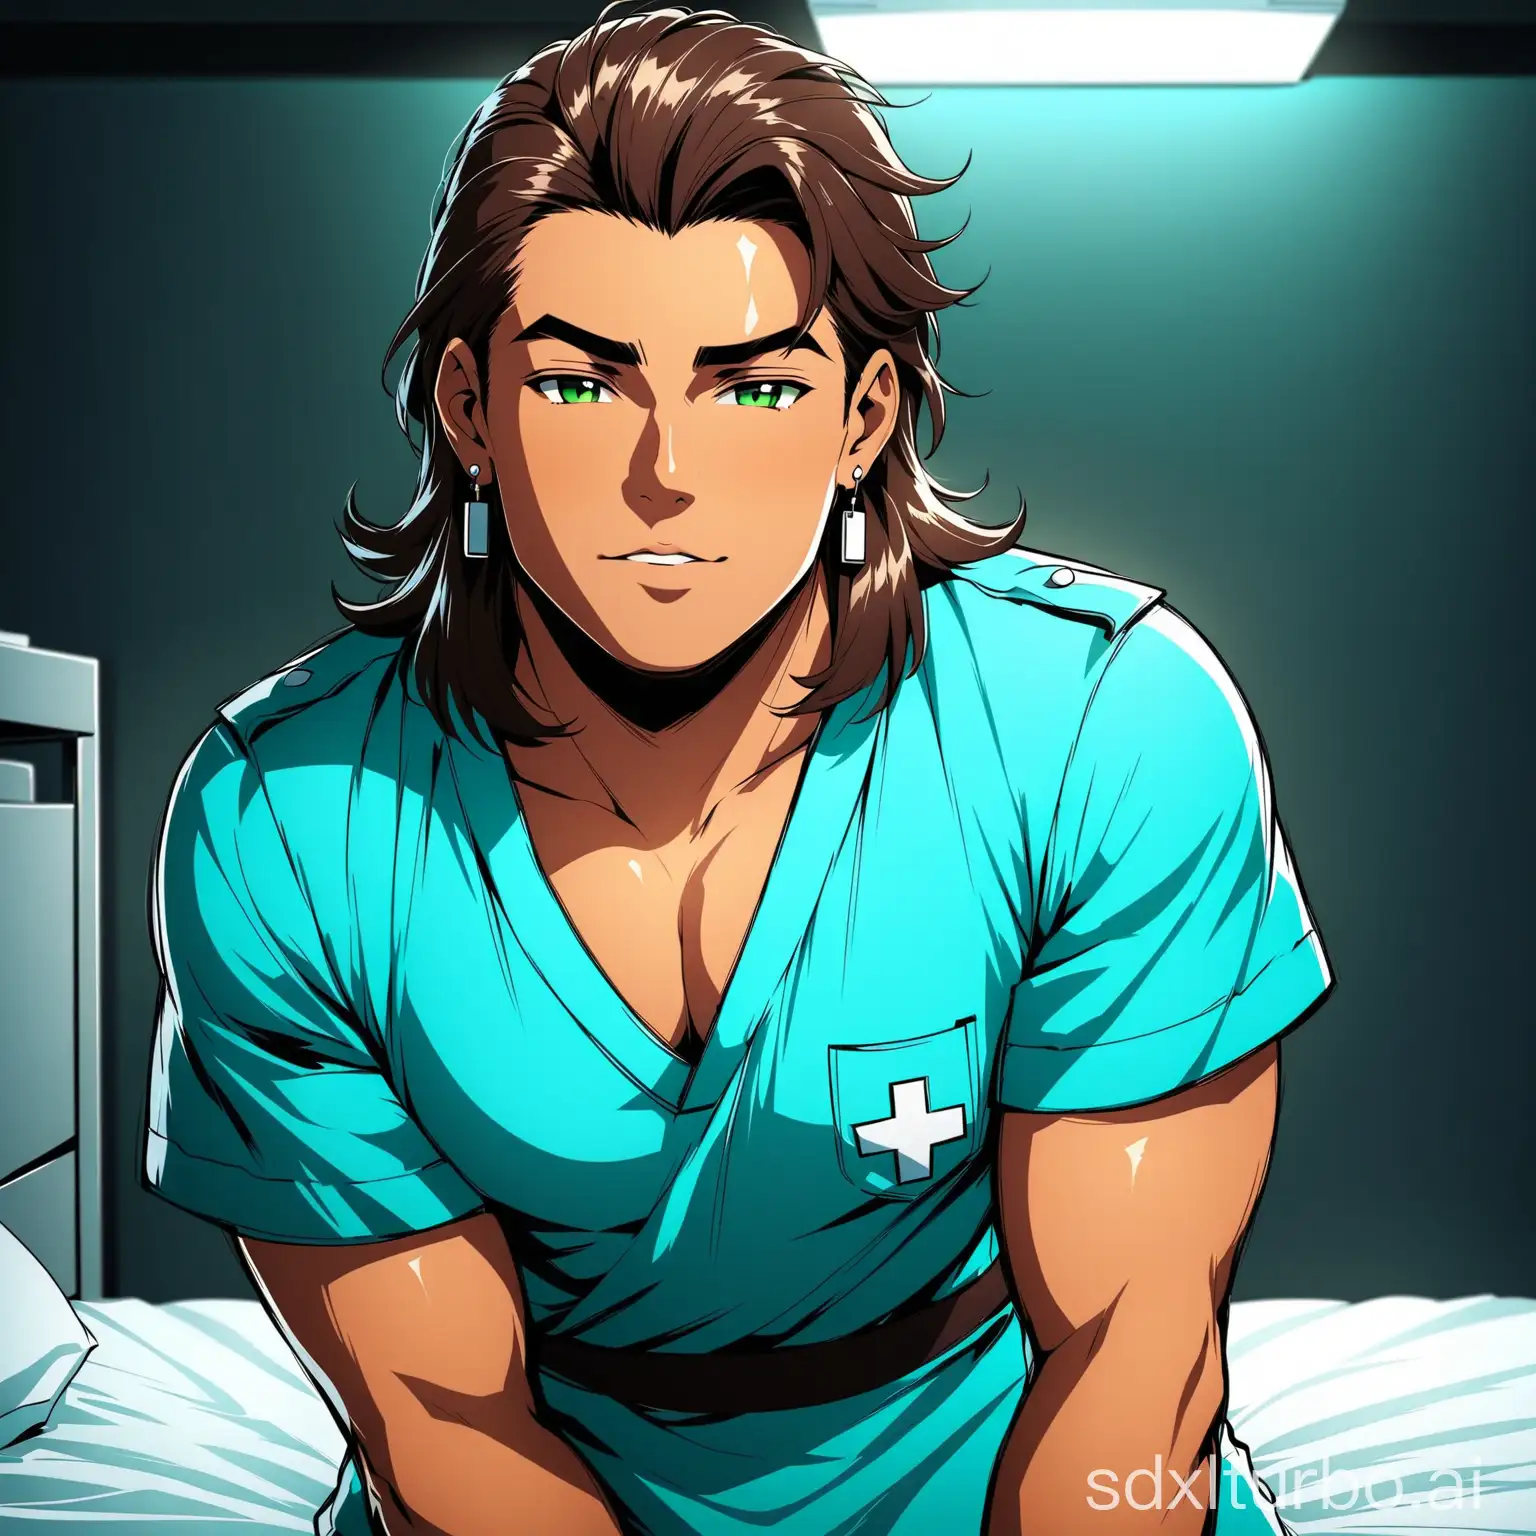 A tanned handsome chubby young man, mullet brown hair, green eyes, earrings, with blue nurse uniform, sensual posing in the back, in a dark room